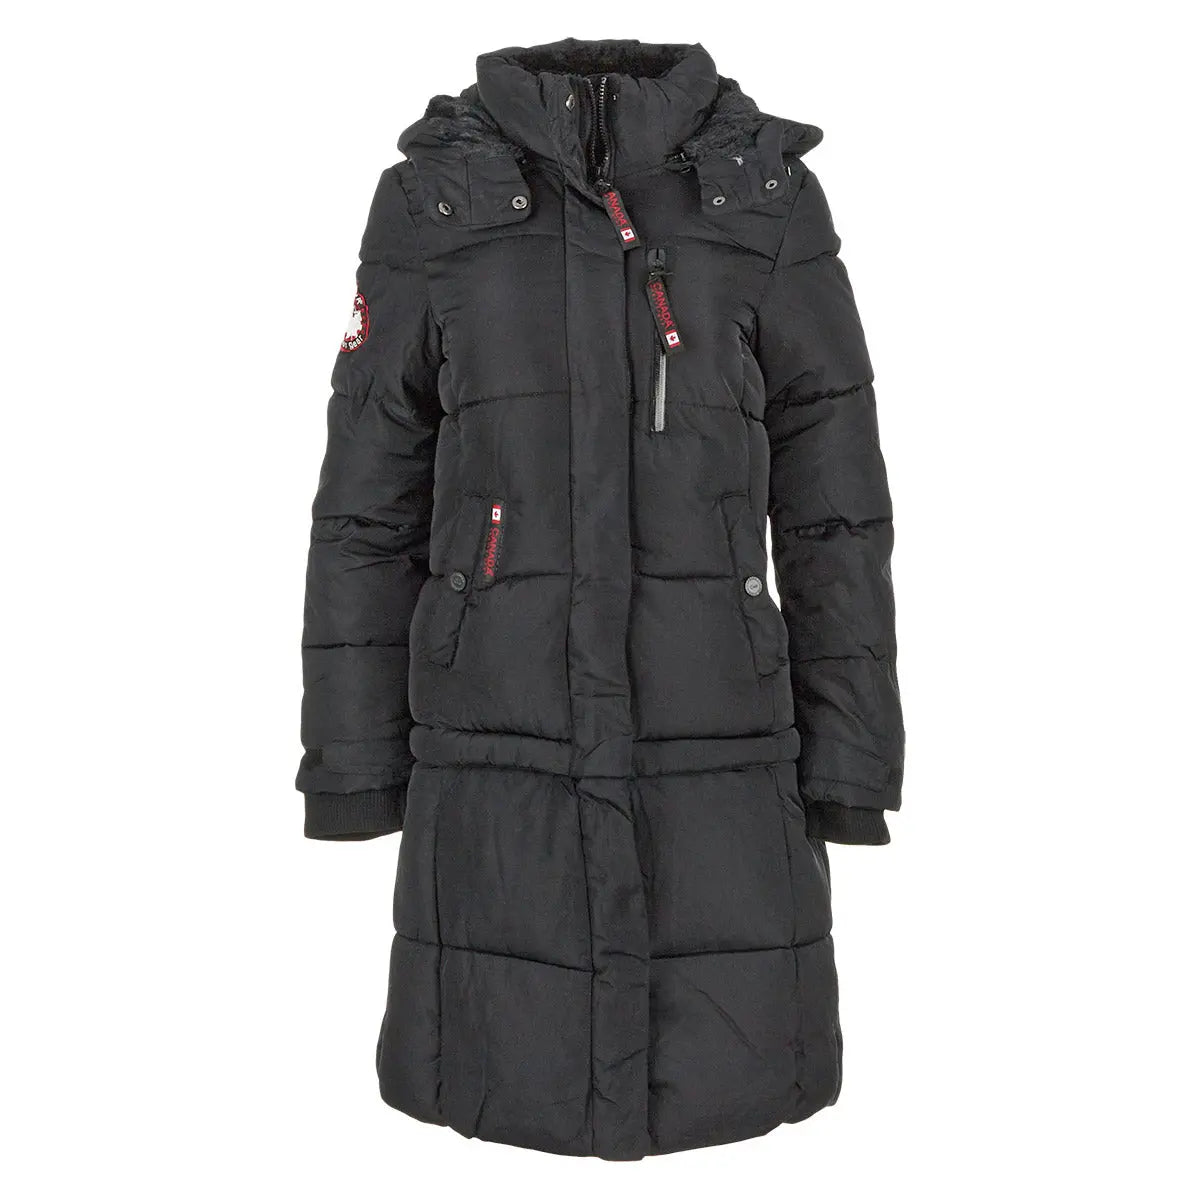 CANADA WEATHER GEAR Womens Long Cold Weather Parka Coat